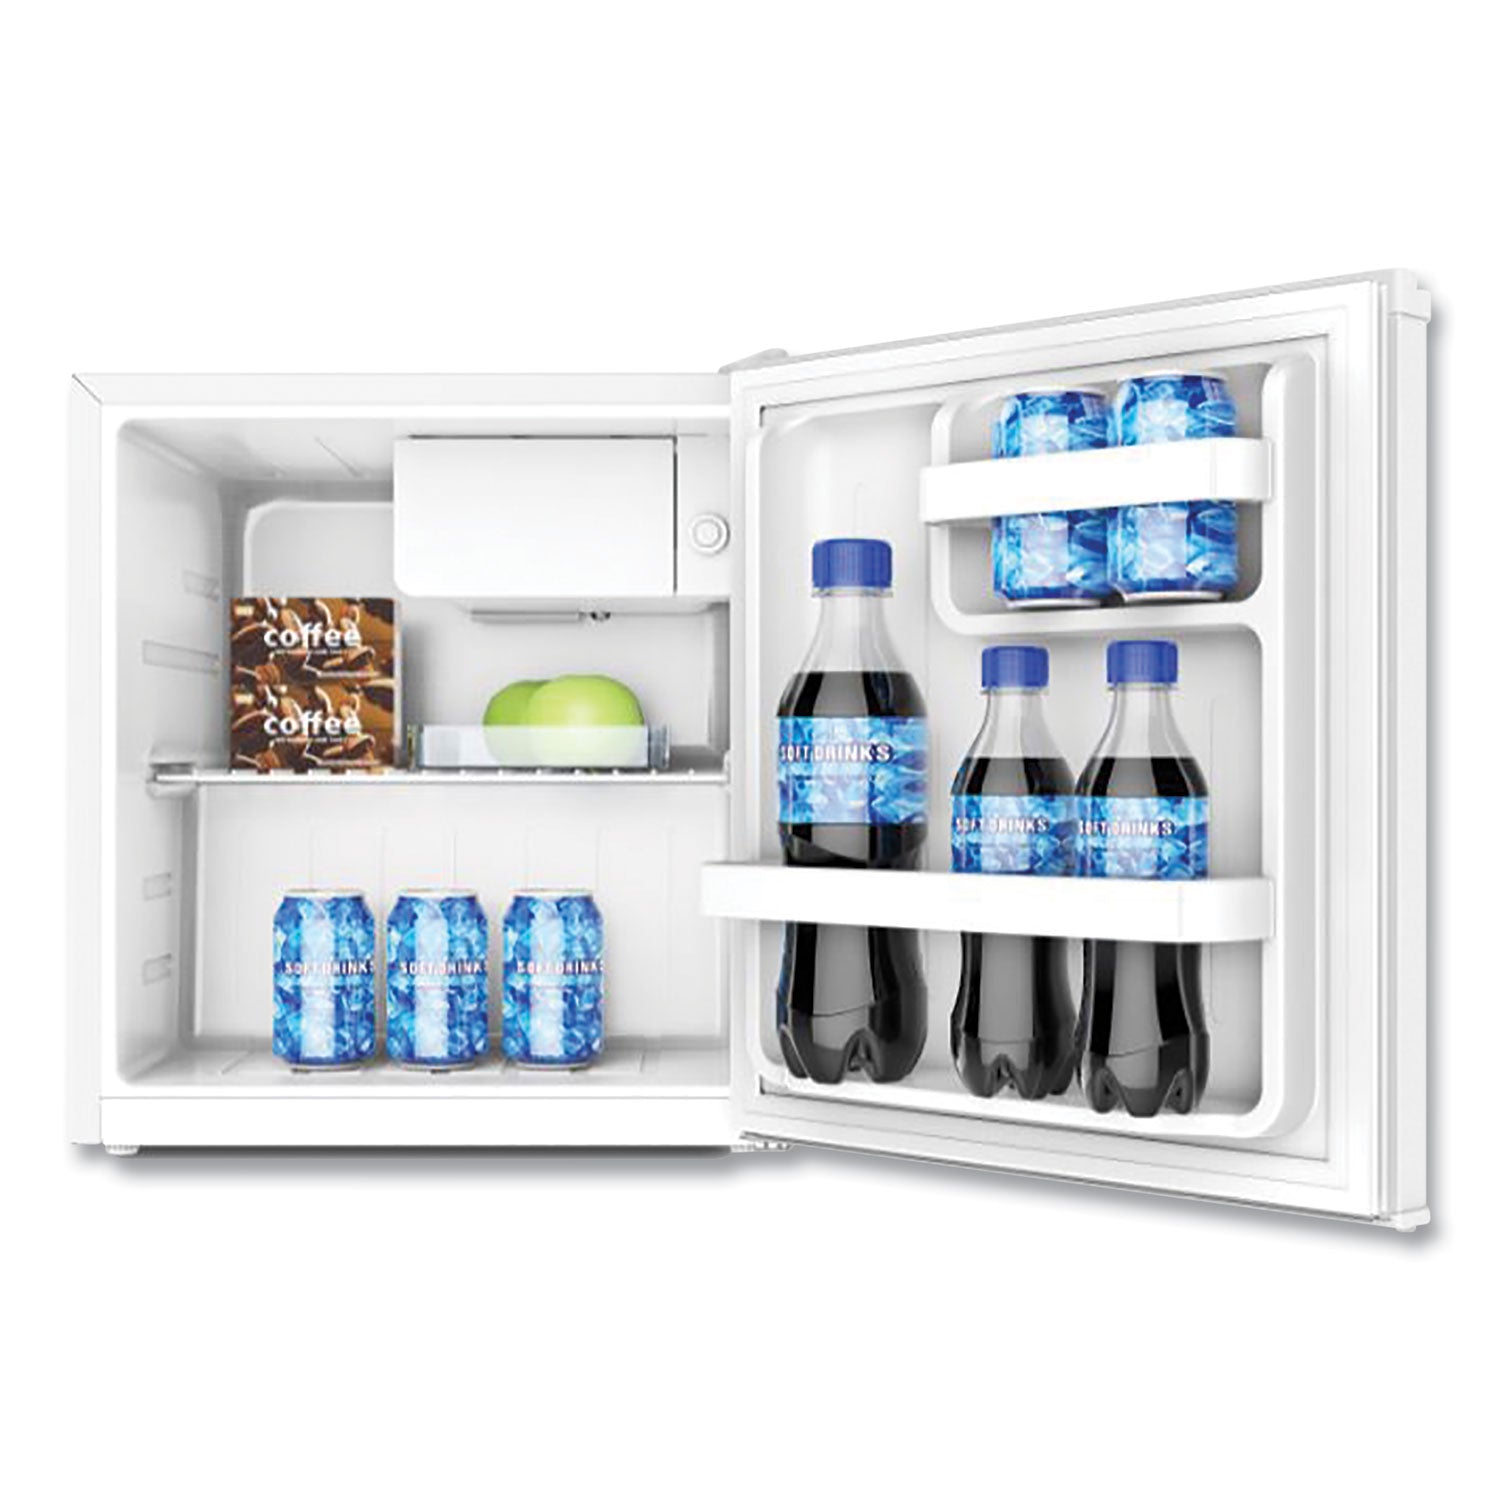 17-cubic-ft-compact-refrigerator-with-chiller-compartment-white_avarm16j0w17x0w - 2